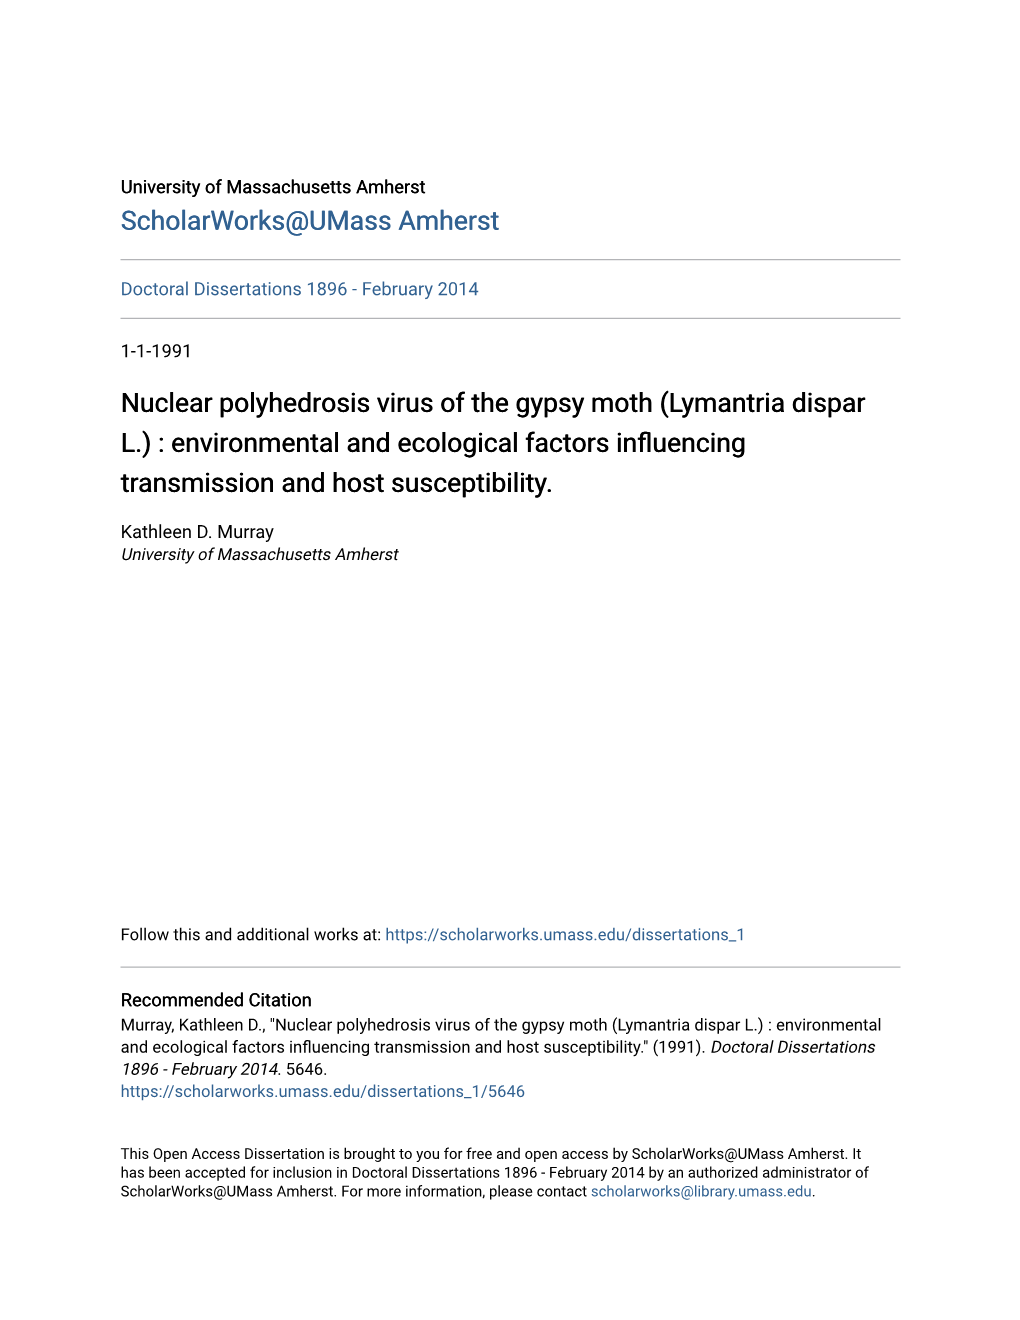 Nuclear Polyhedrosis Virus of the Gypsy Moth (Lymantria Dispar L.) : Environmental and Ecological Factors Influencing Transmission and Host Susceptibility